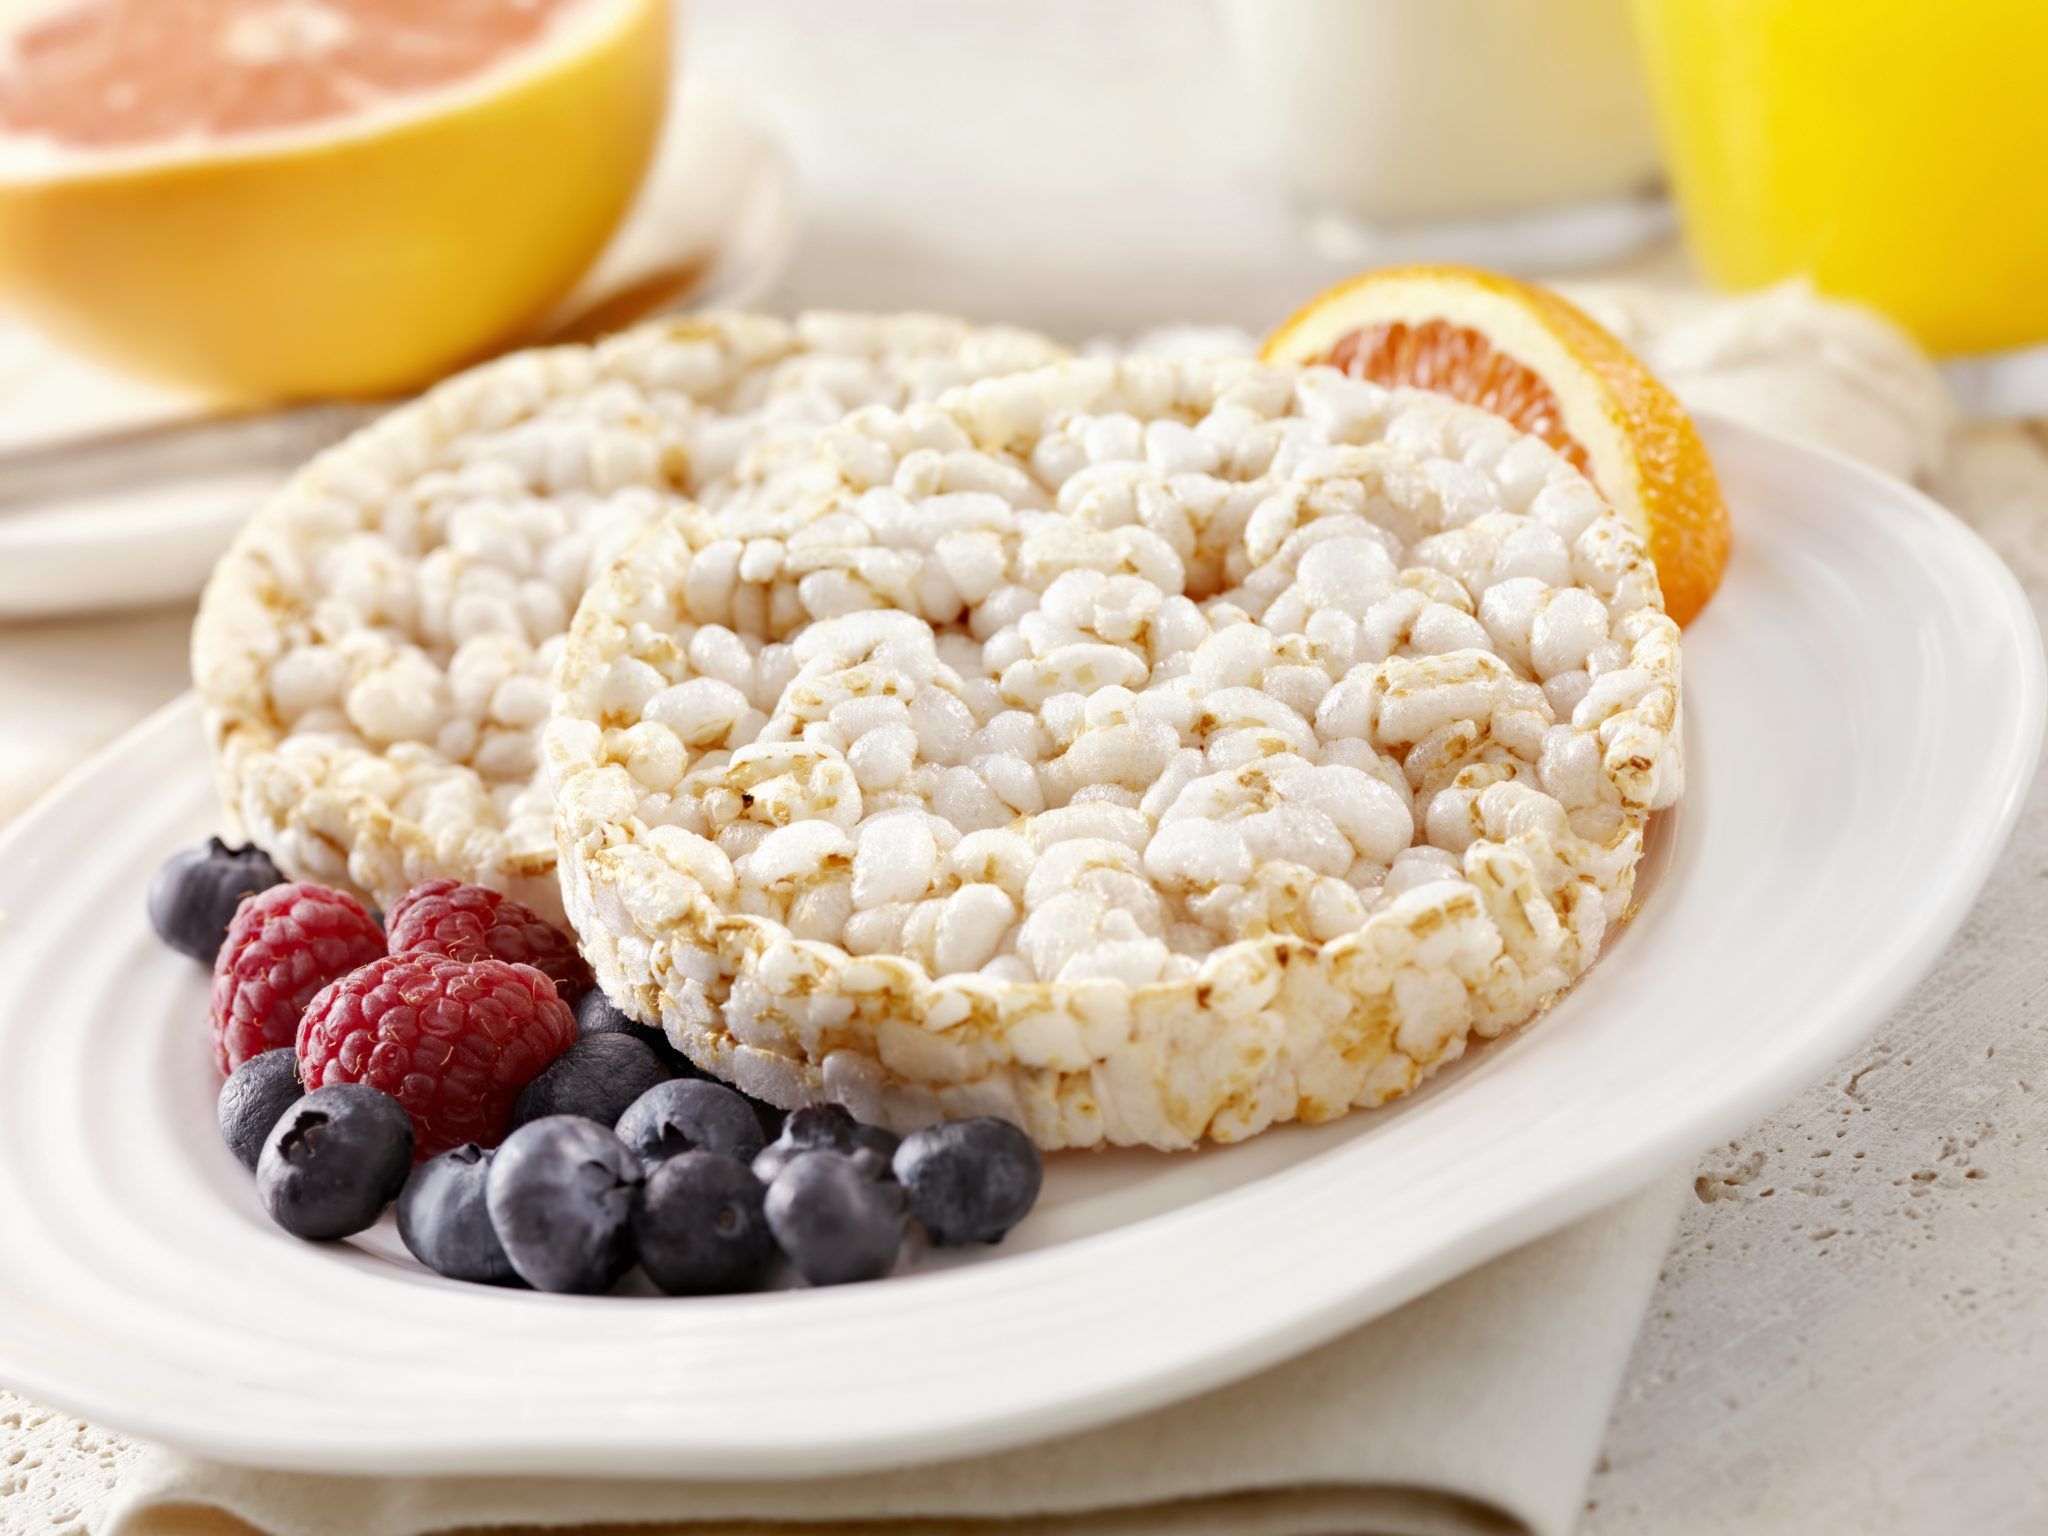 Rice cakes are a wiser snack option if you're looking to lower your in...